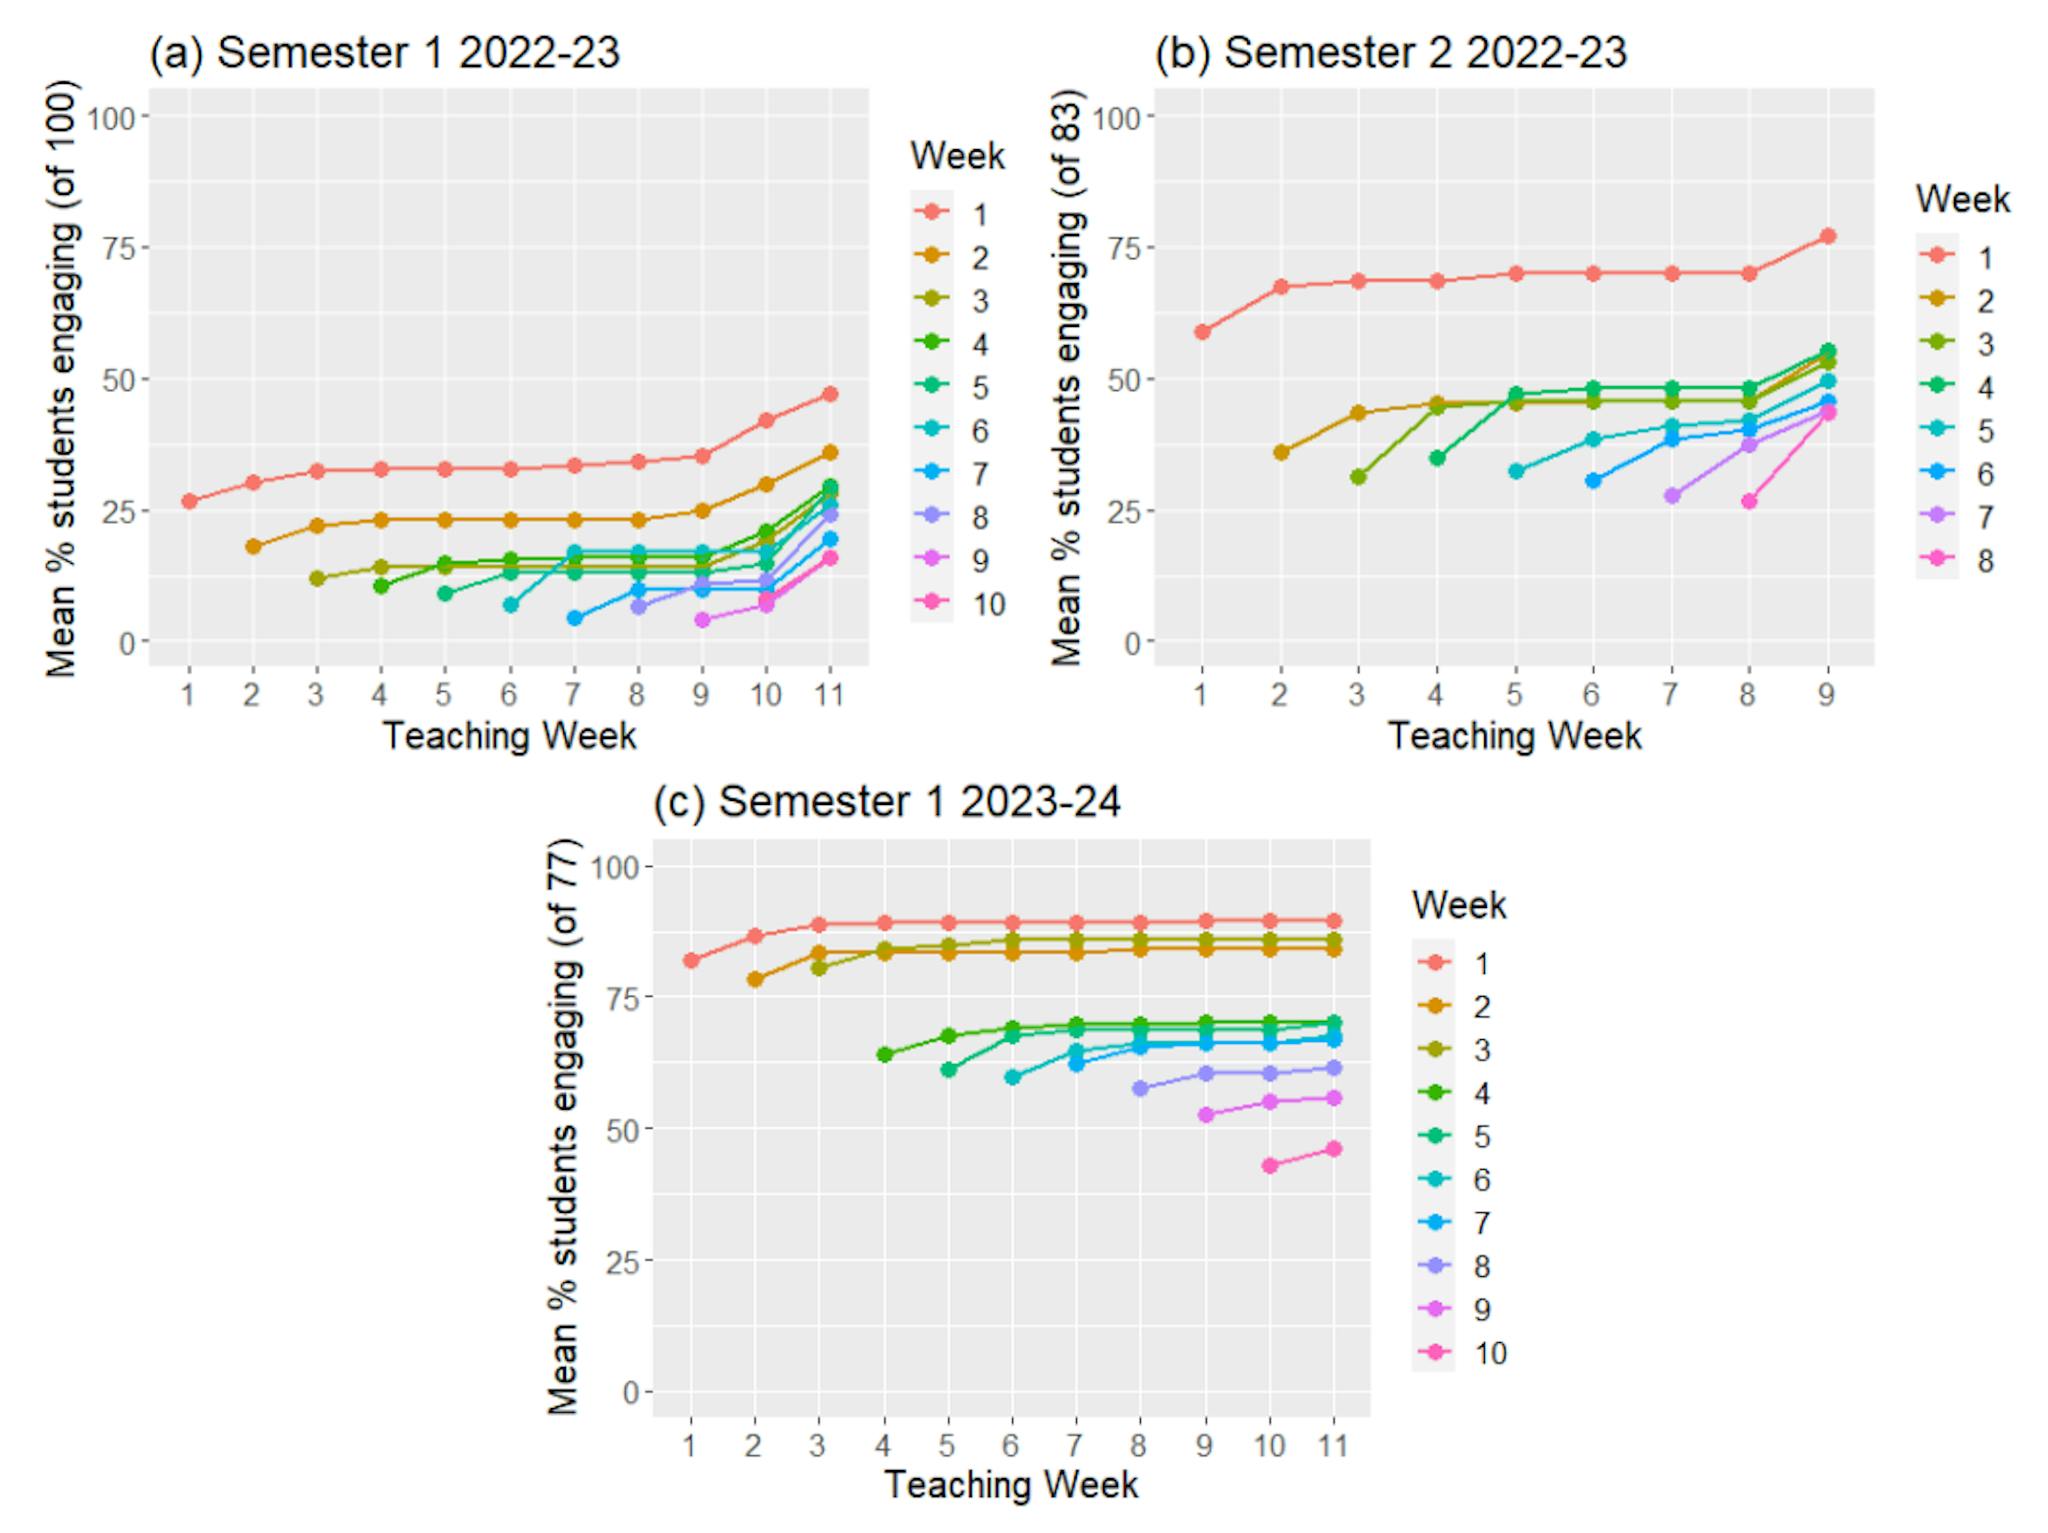 Figure 1: Cumulative mean percentage of students engaging in weekly pre-lecture quizzes across each semester of interest. Figure (a) shows data for semester 1 in academic year 2022-23 before the Level Up! intervention was implemented. Figure (b) shows data for semester 2 in academic year 2022-23 after the Level Up! intervention was implemented. Figure (c) shows data for semester 1 in academic year 2023-24 after the Level Up! intervention was implemented.